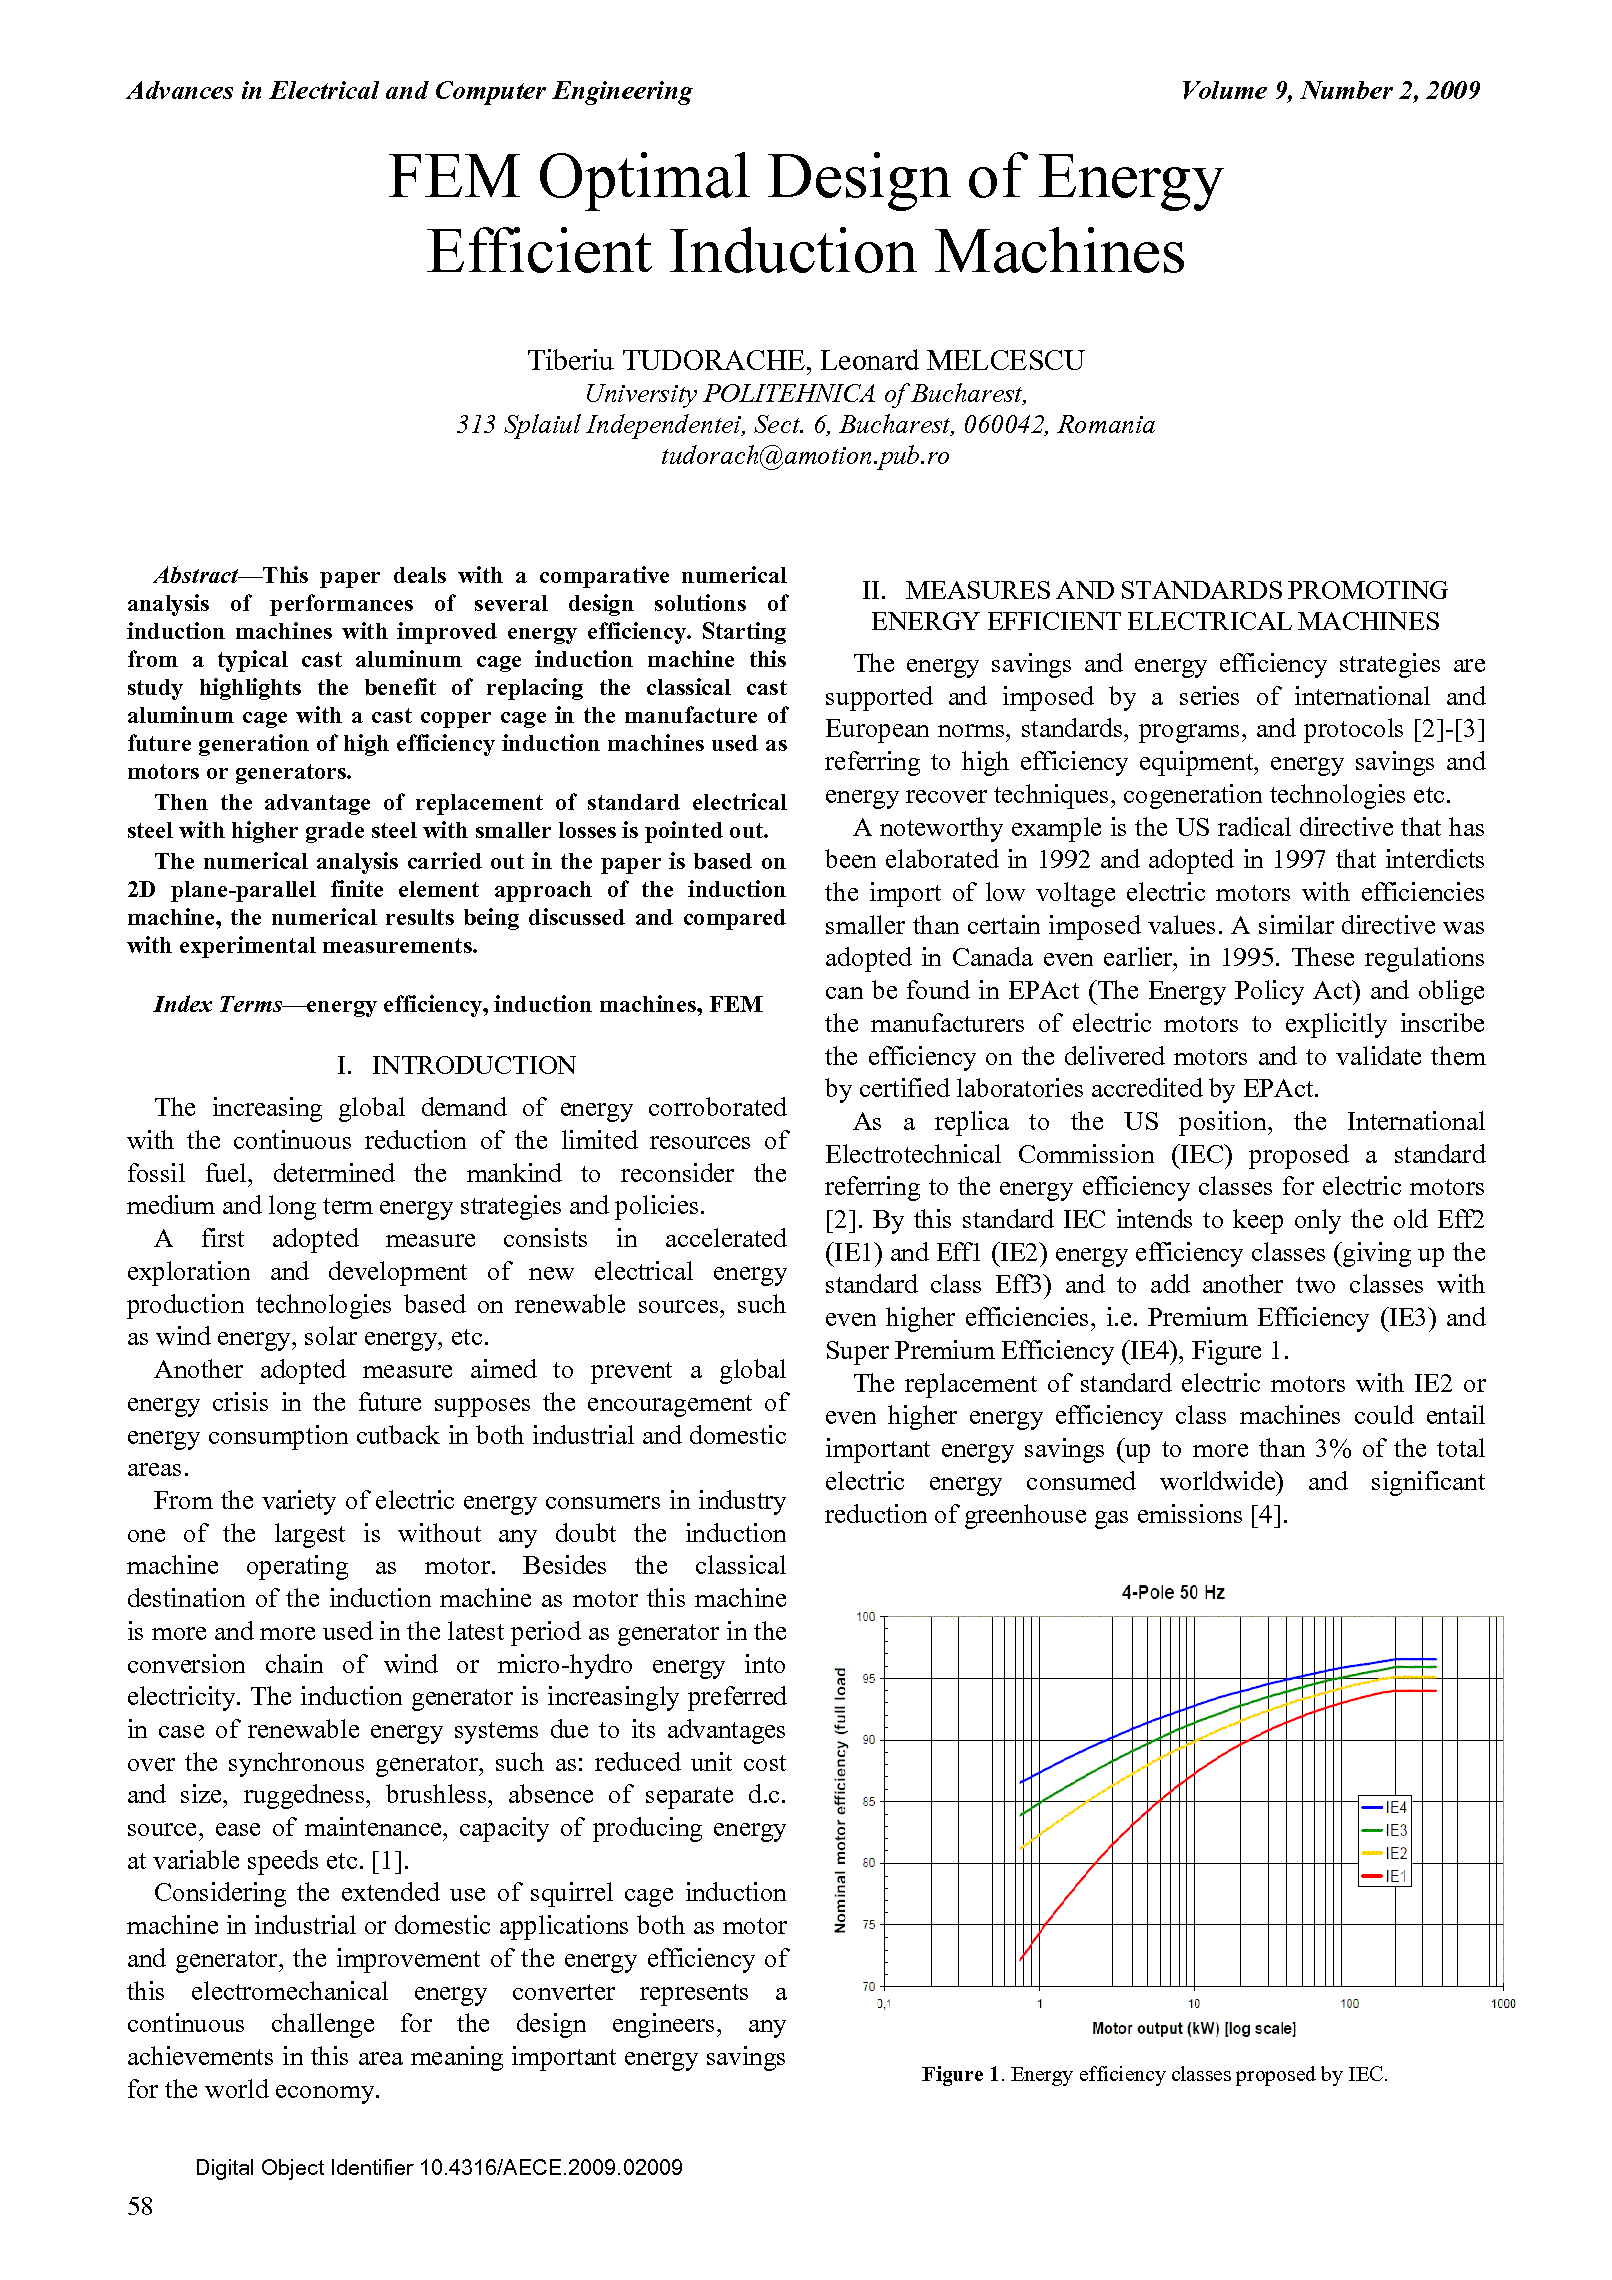 PDF Quickview for paper with DOI:10.4316/AECE.2009.02009